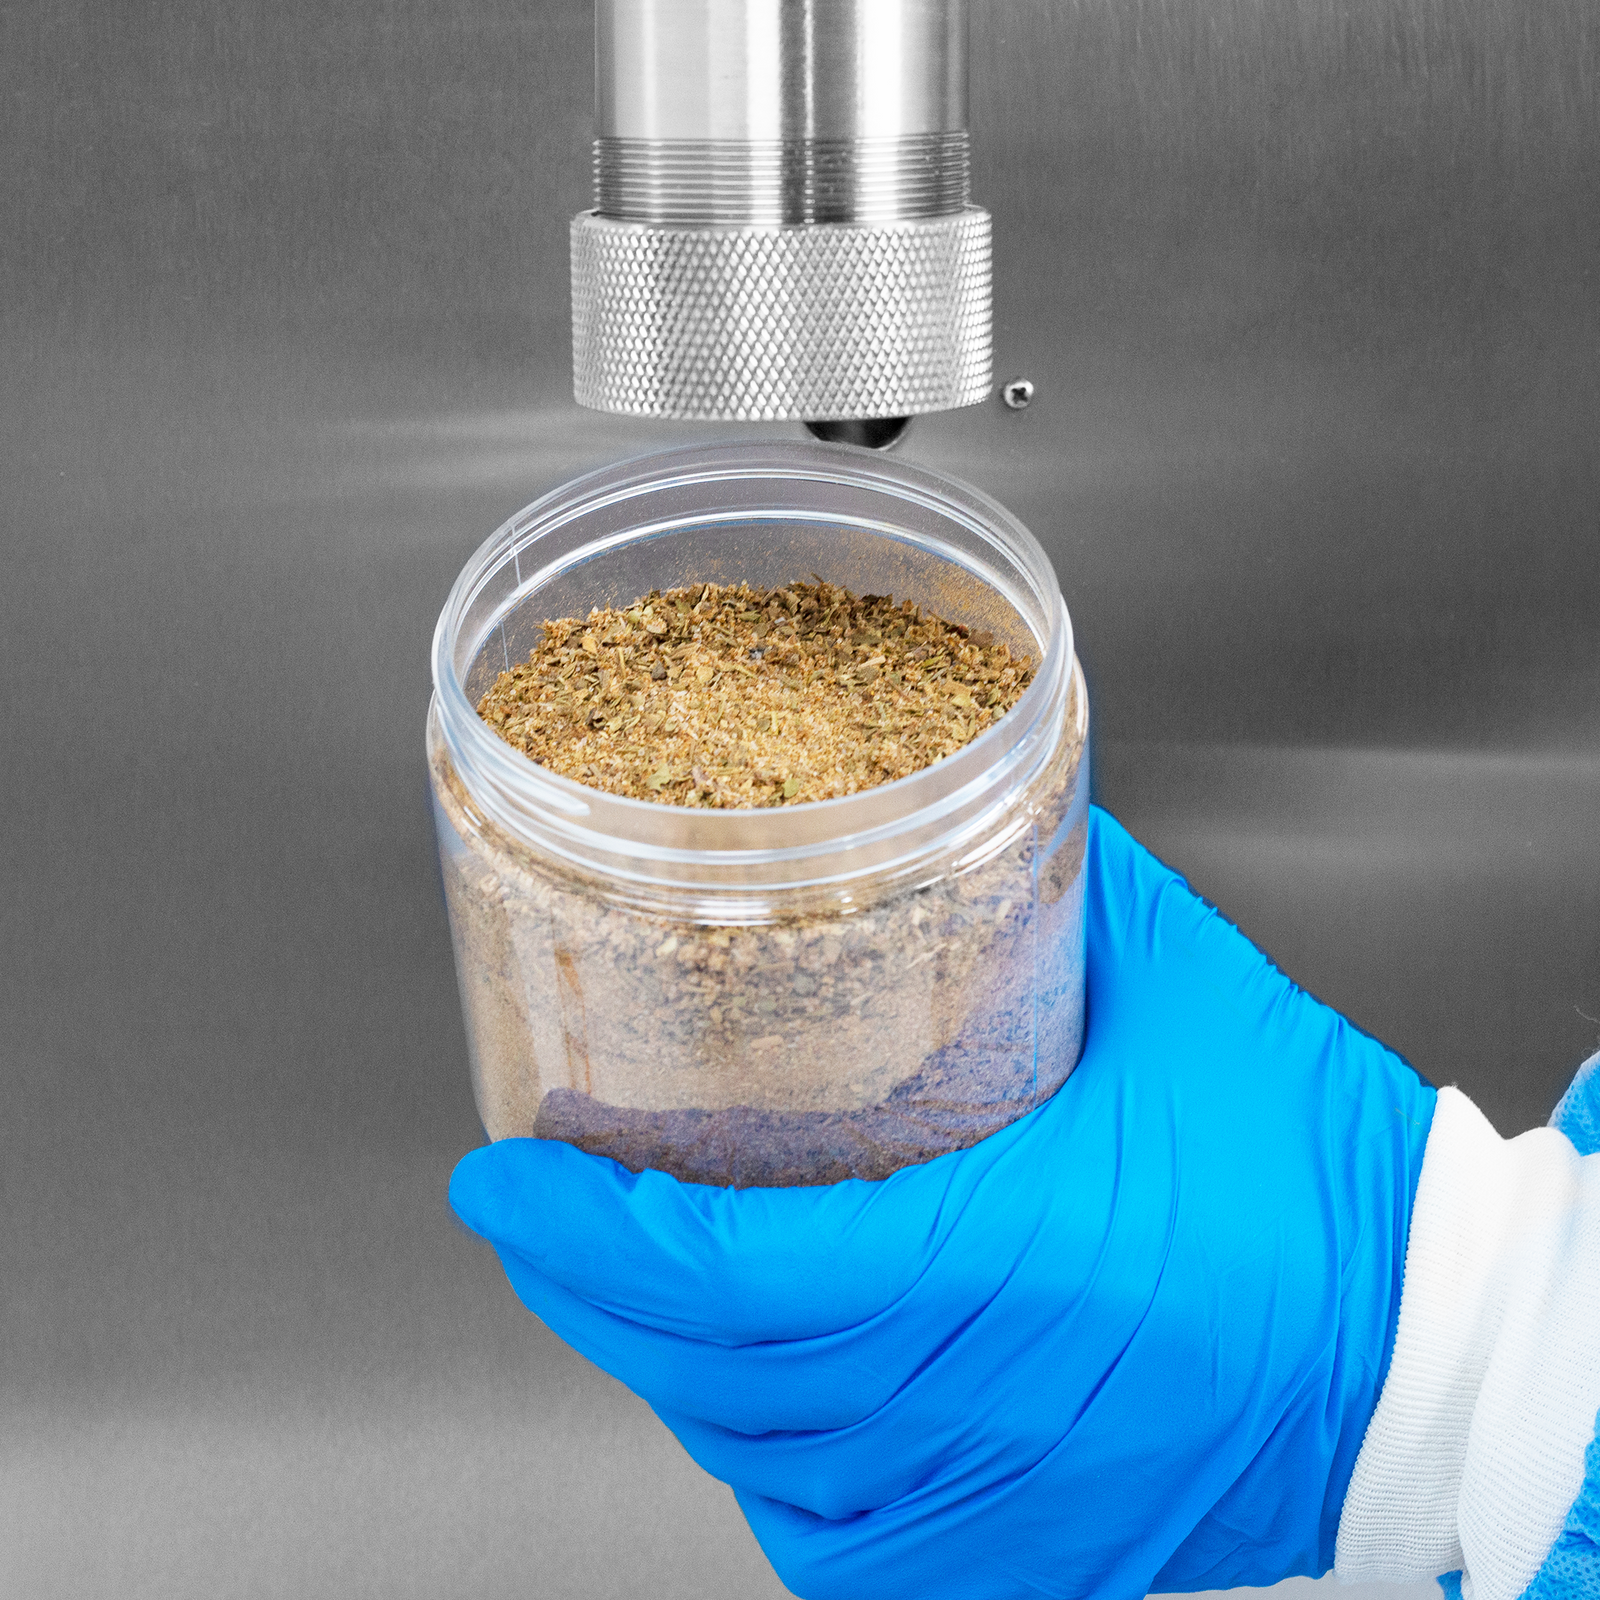 Close-up picture of a person with blue latex gloves and PPE holding a clear container filled with herb seasoning powder. The container is held under the dispensing nozzle of an auger powder filler, which was used to dispense the powder into the container.